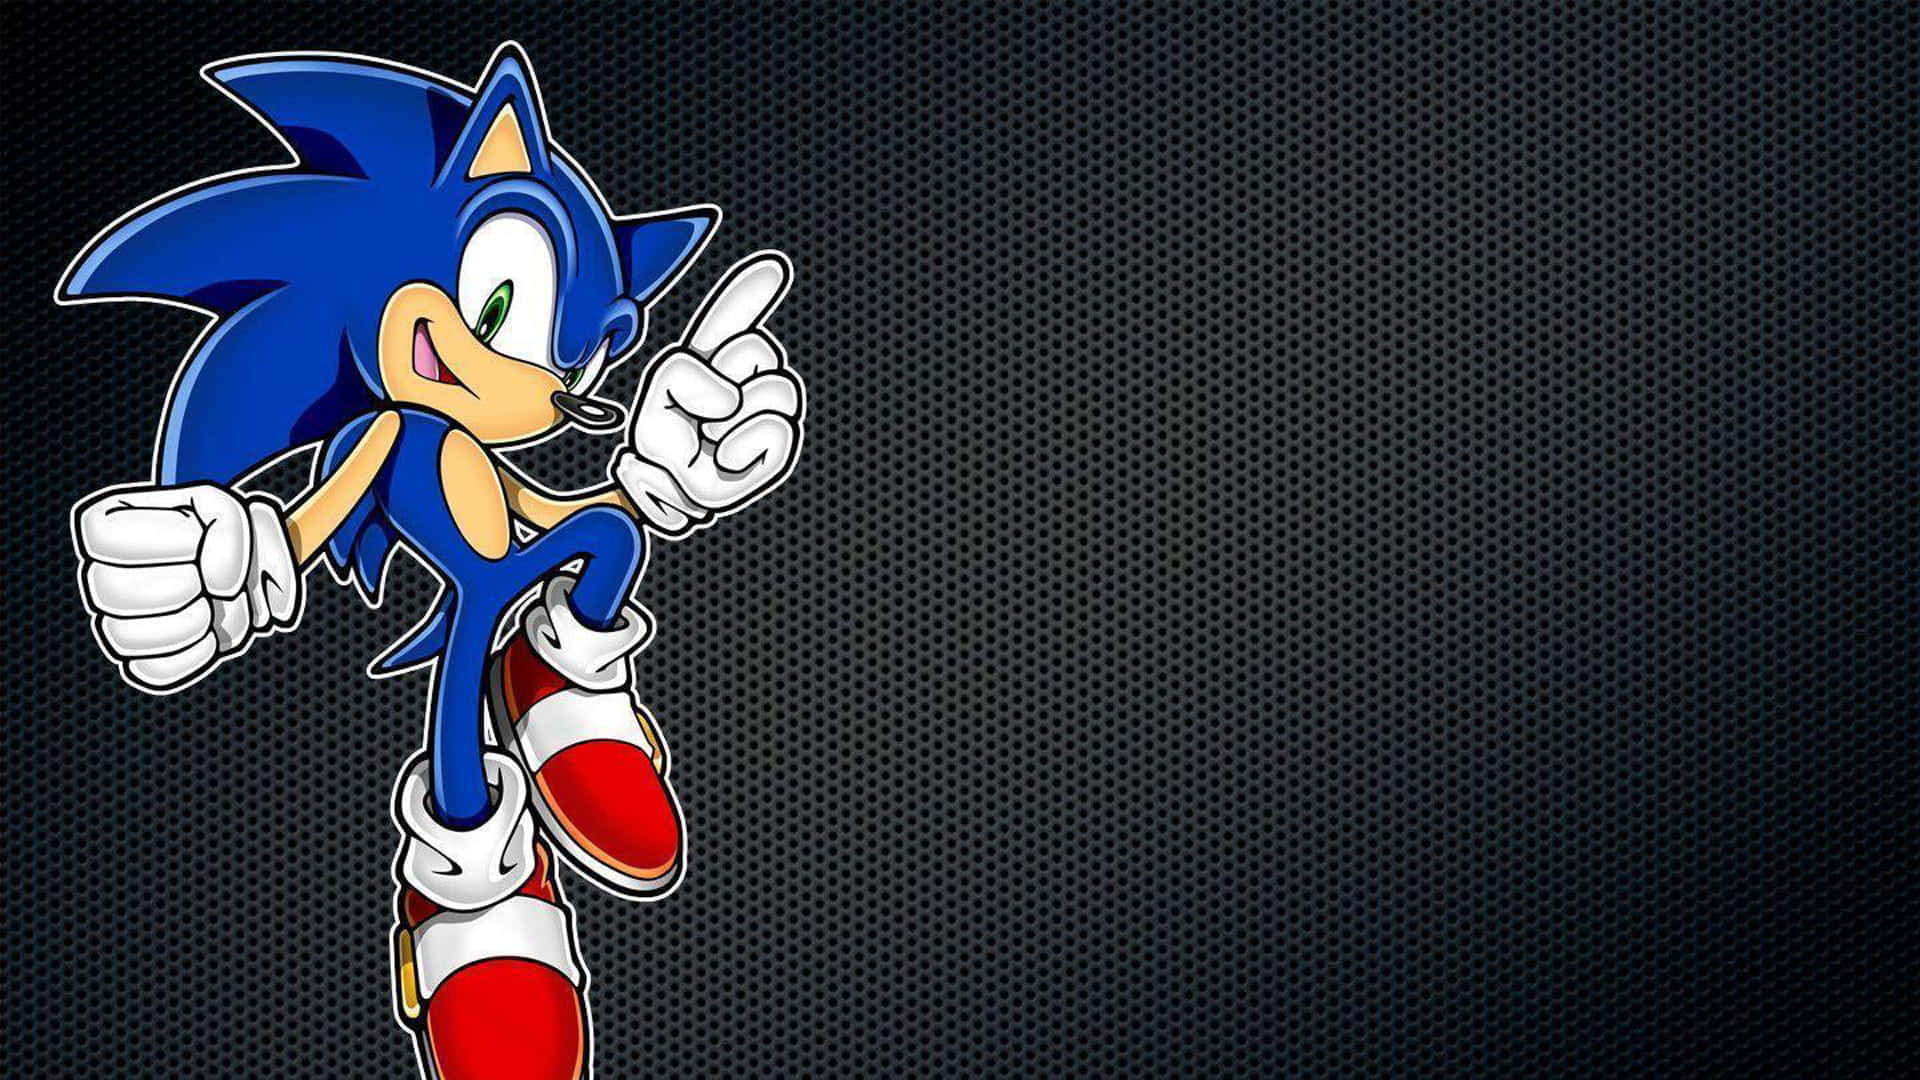 200+] Sonic Wallpapers